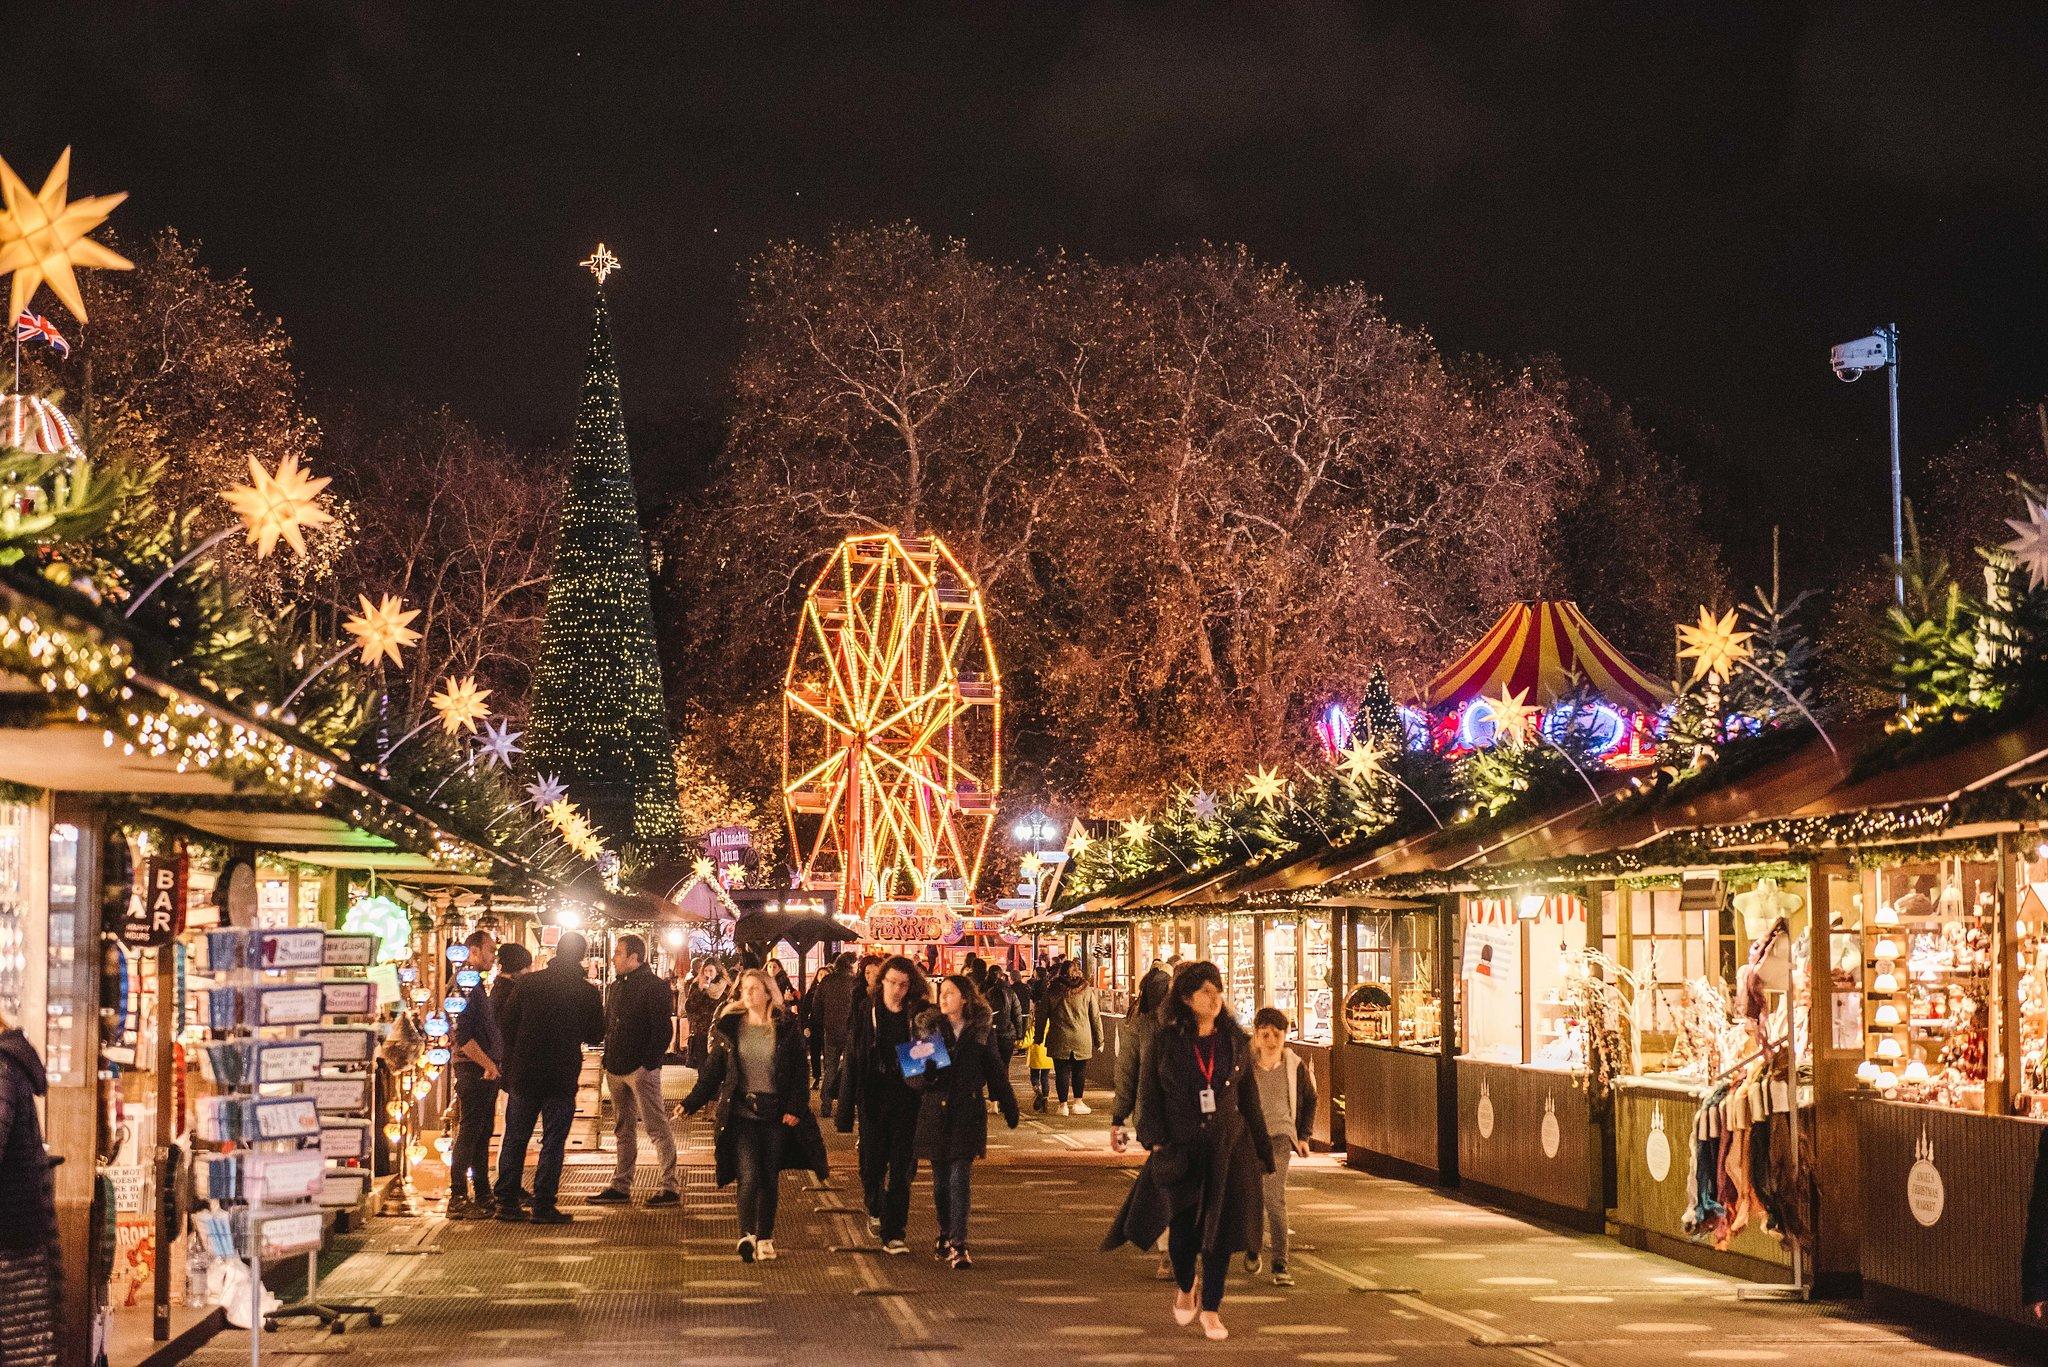 Best London Christmas Markets In 2021 - Christmas